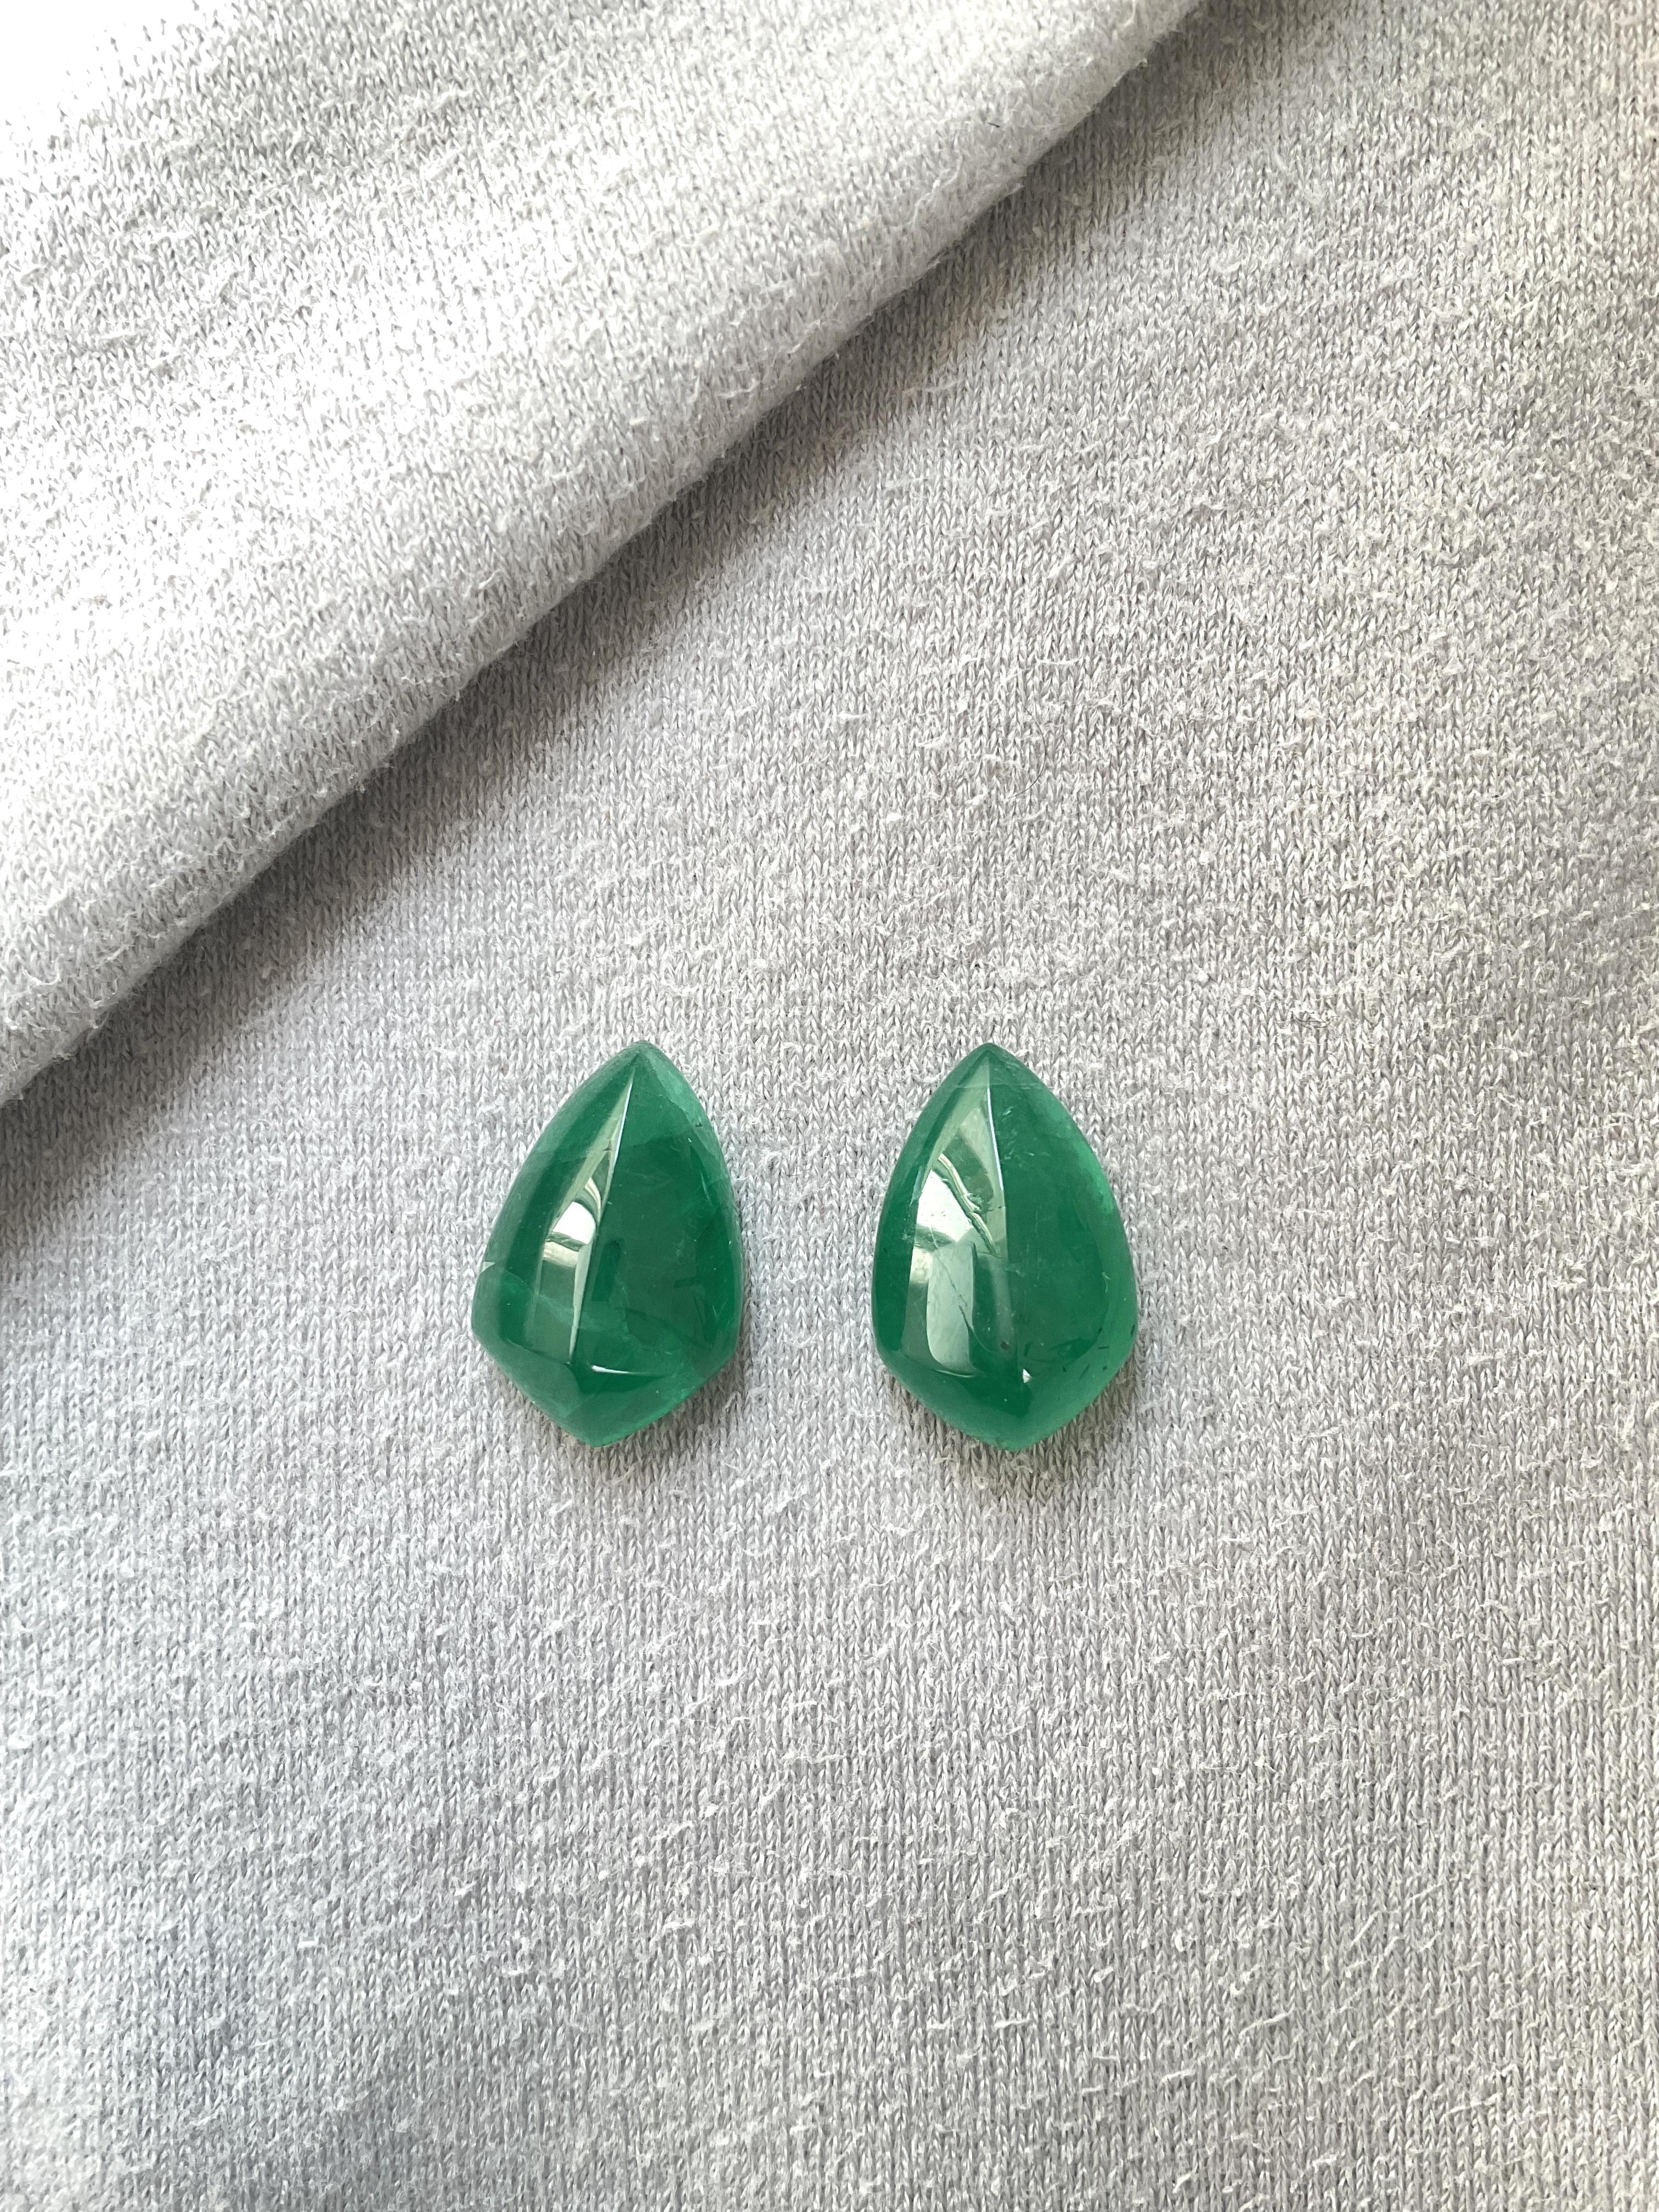 Shield Cut 20.71 carats Zambian Emerald Shield Pair cabochon for fine Jewelry Natural Gems For Sale